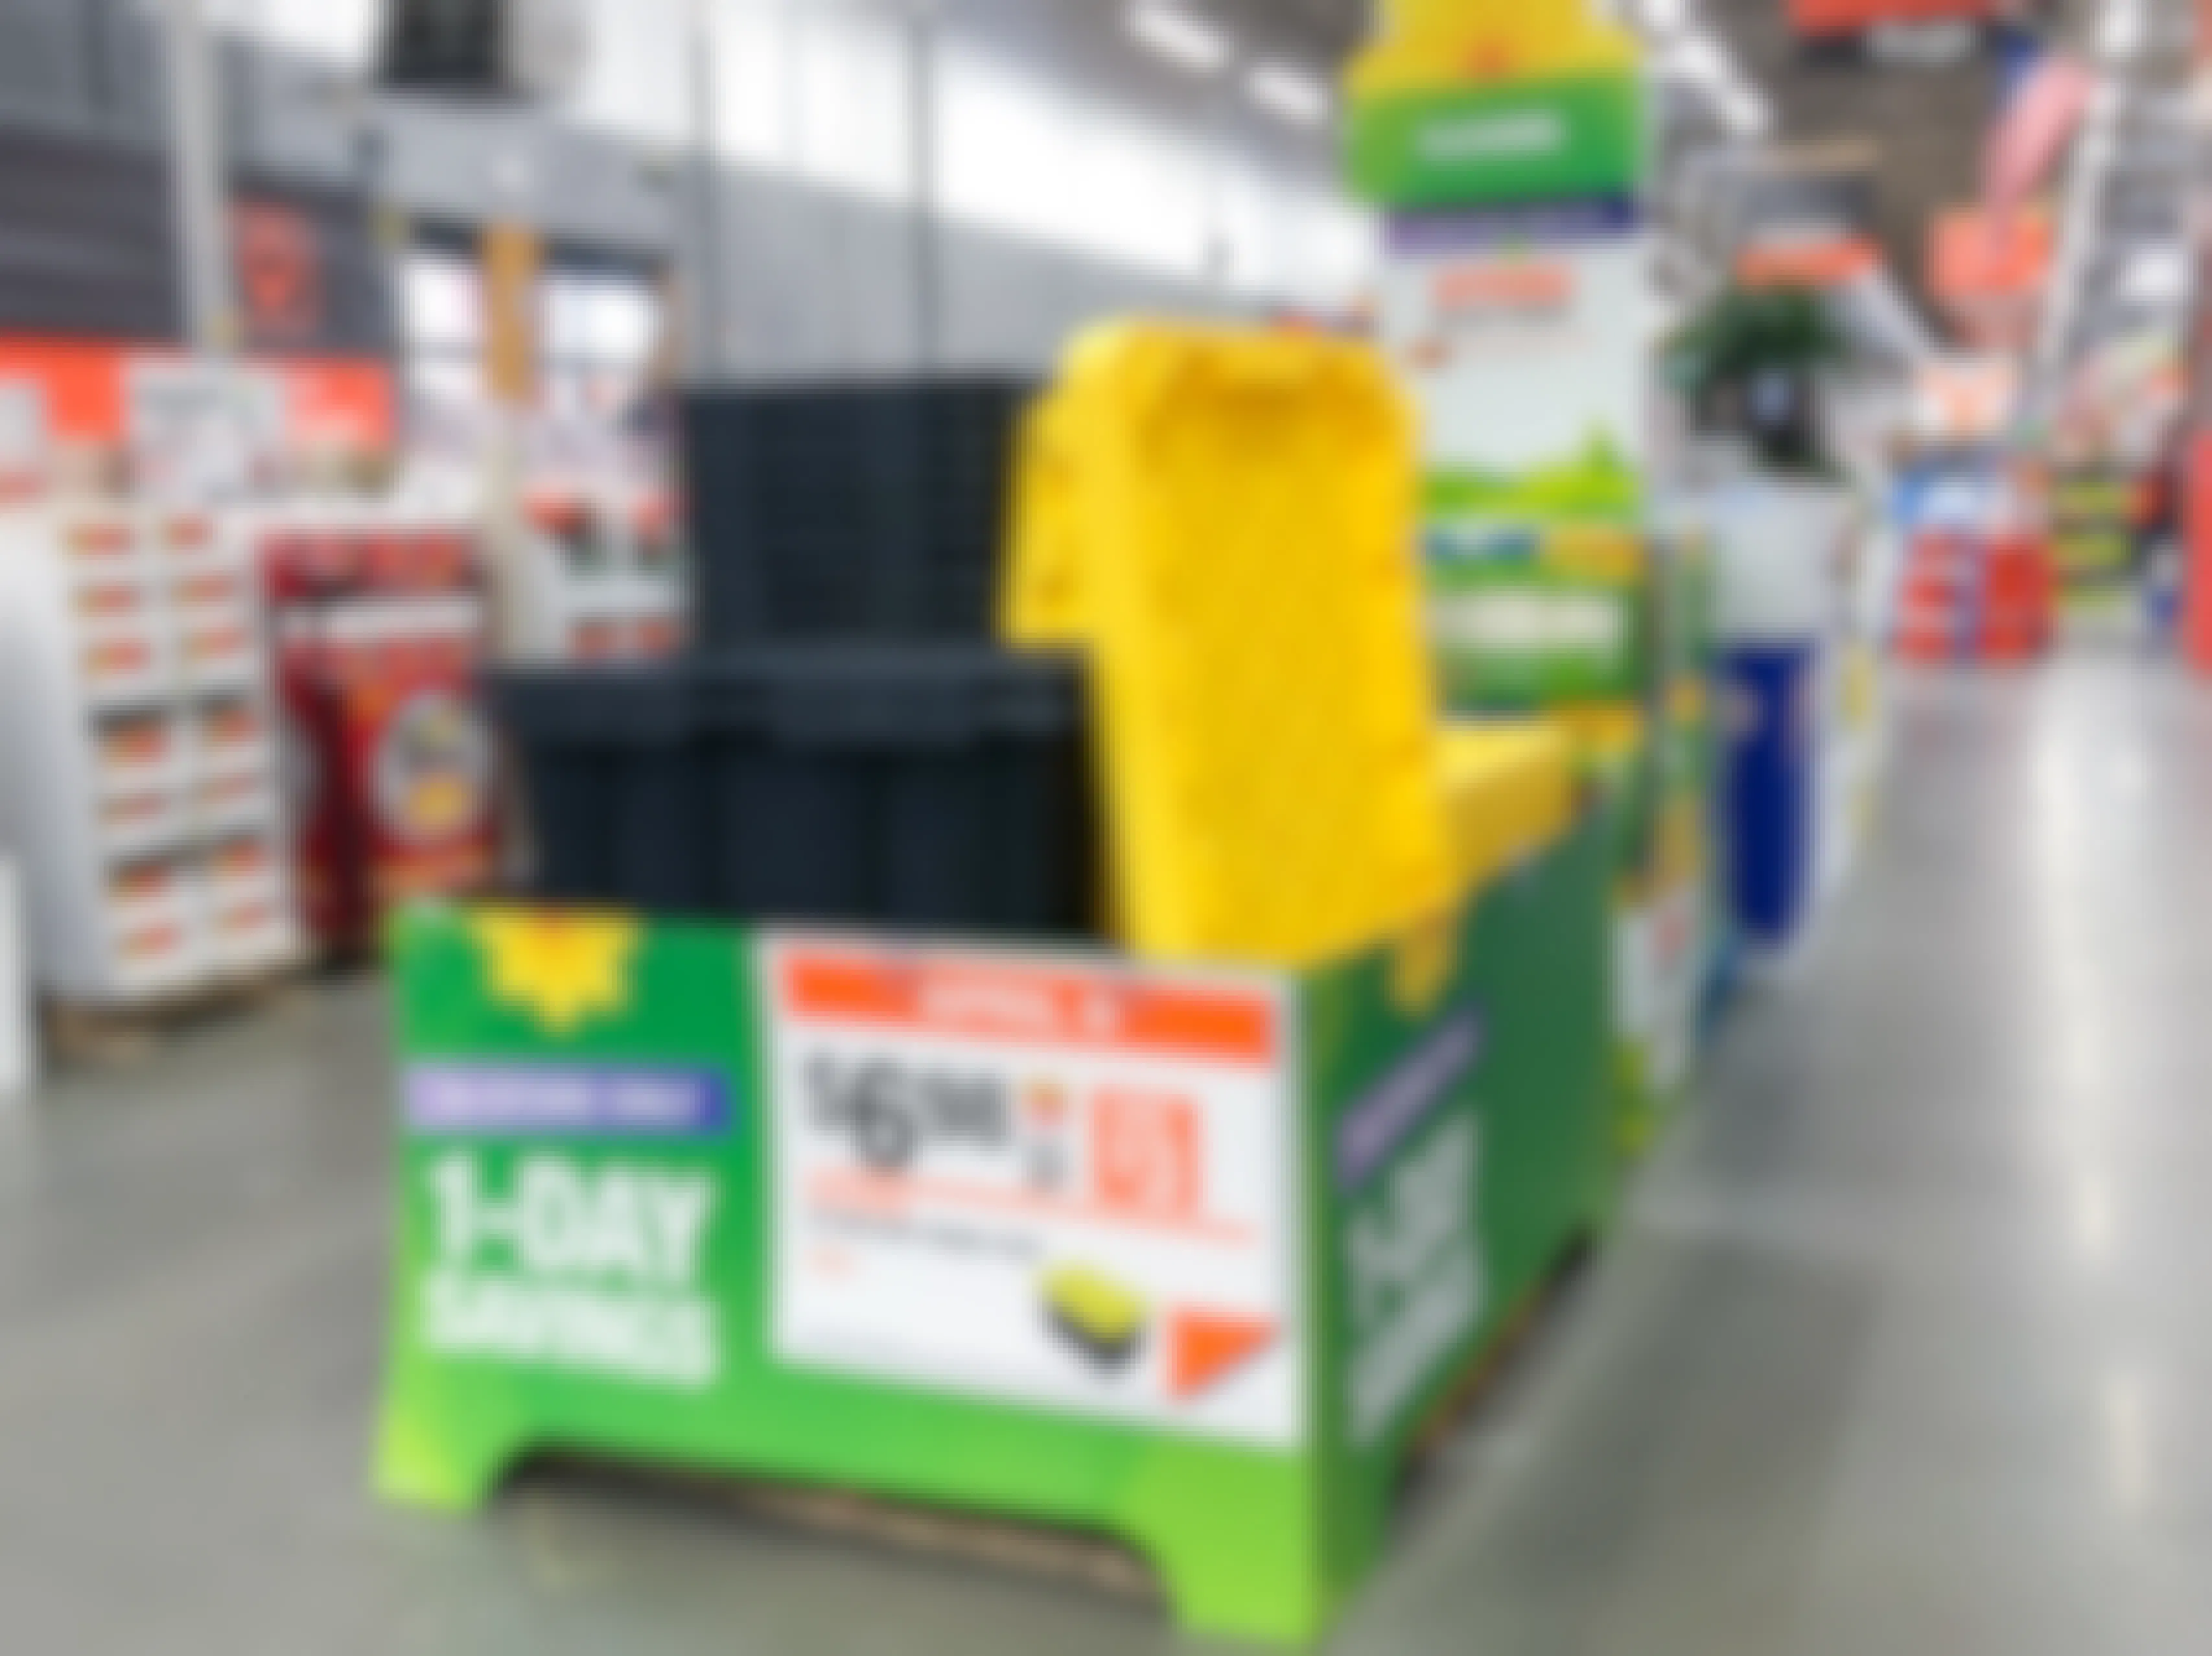 A display of black and yellow storage bins with a 1-day savings sign.